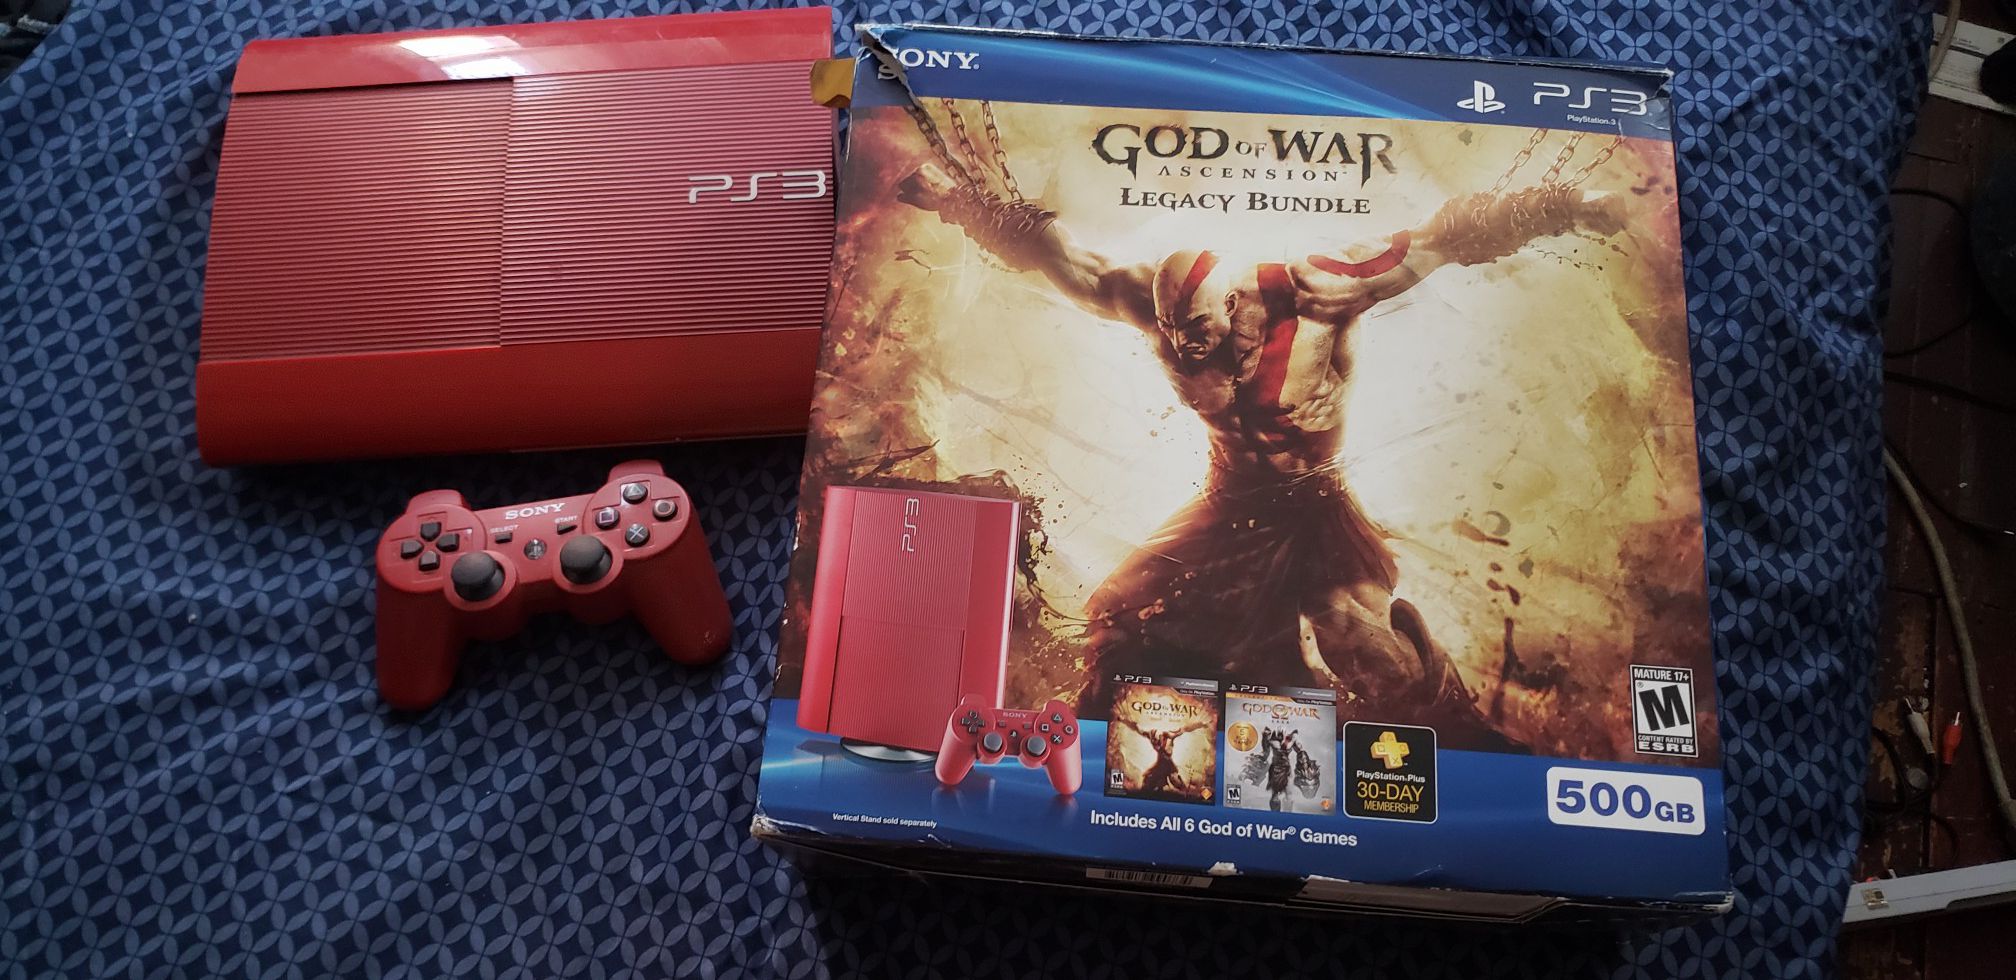 God of war limited edition ps3